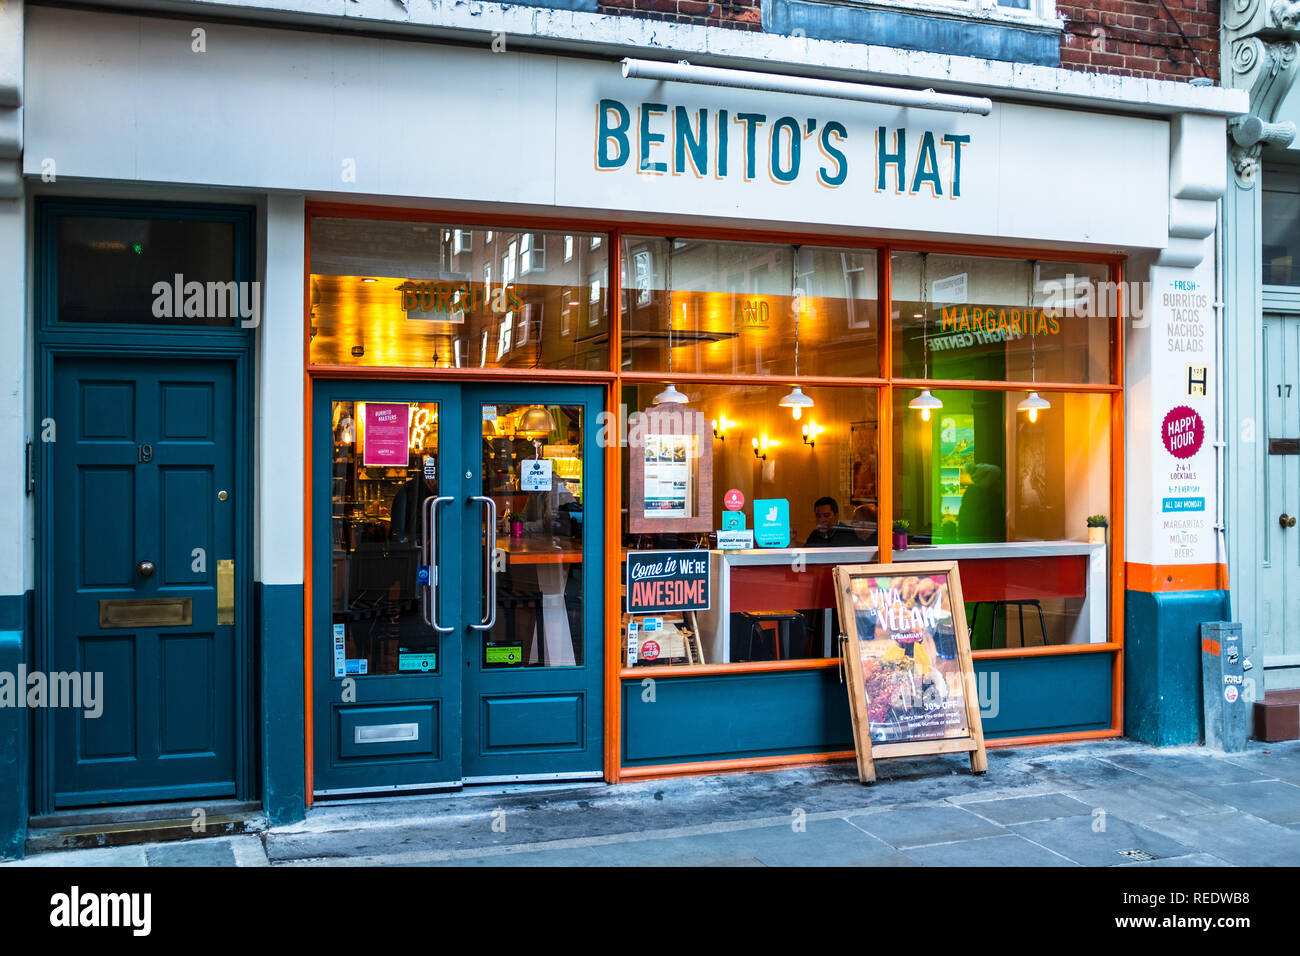 Benitos Hat - a branch of the Mexican themed Benitos Hat restaurant chain in London Stock Photo